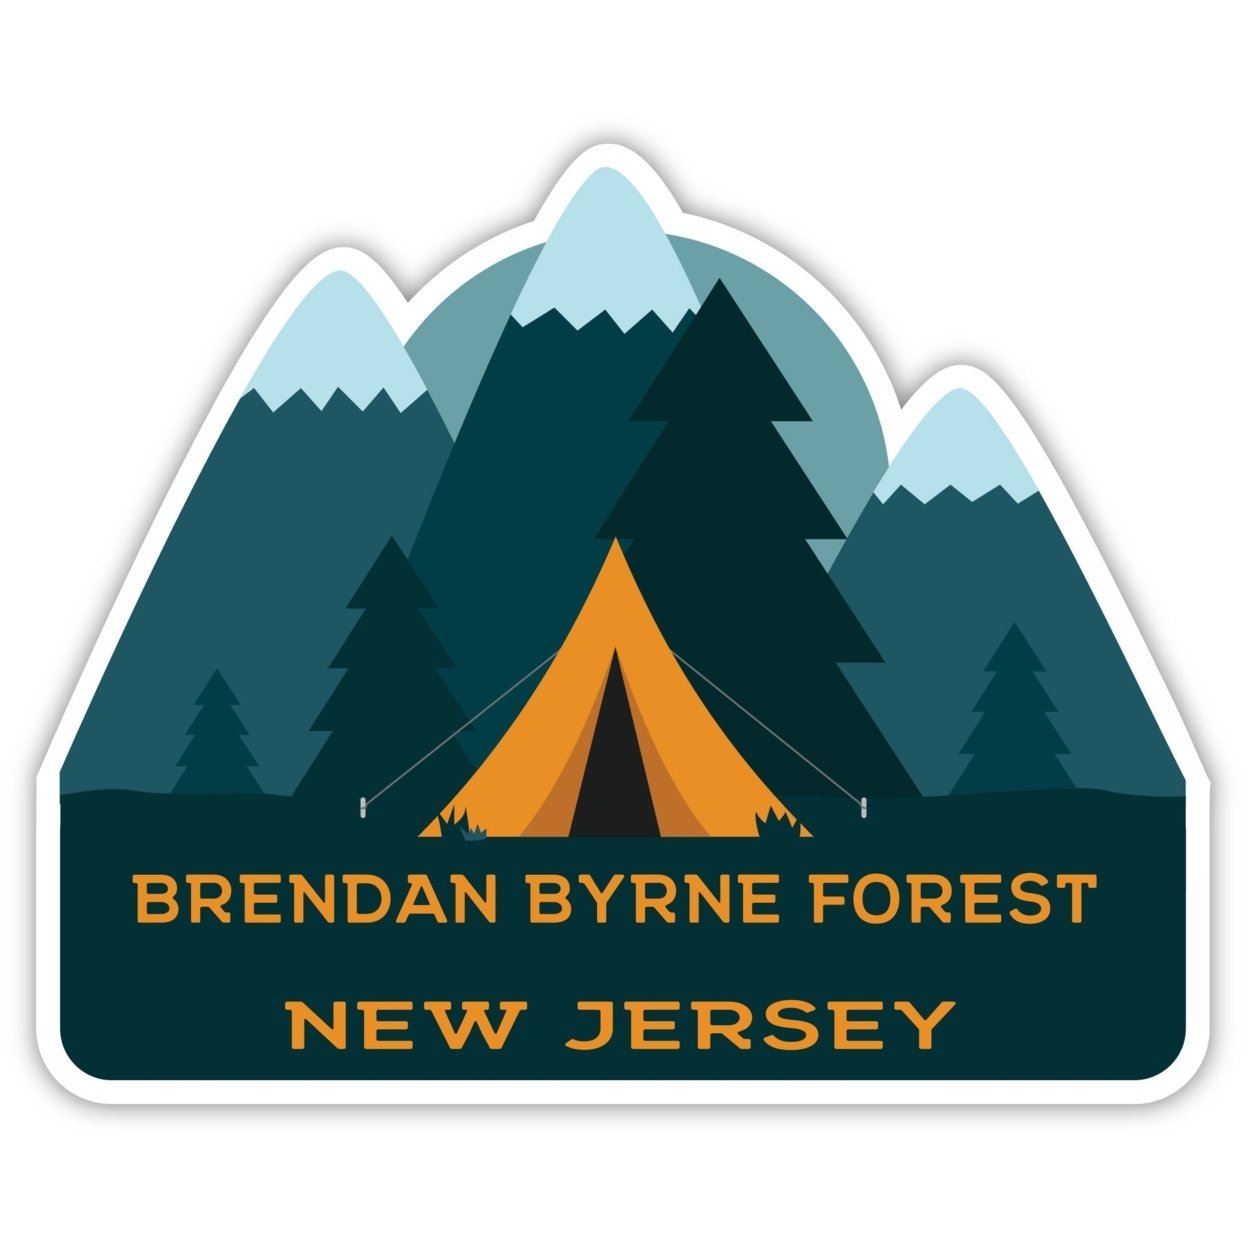 Brendan Byrne Forest New Jersey Souvenir Decorative Stickers (Choose Theme And Size) - 4-Pack, 10-Inch, Tent